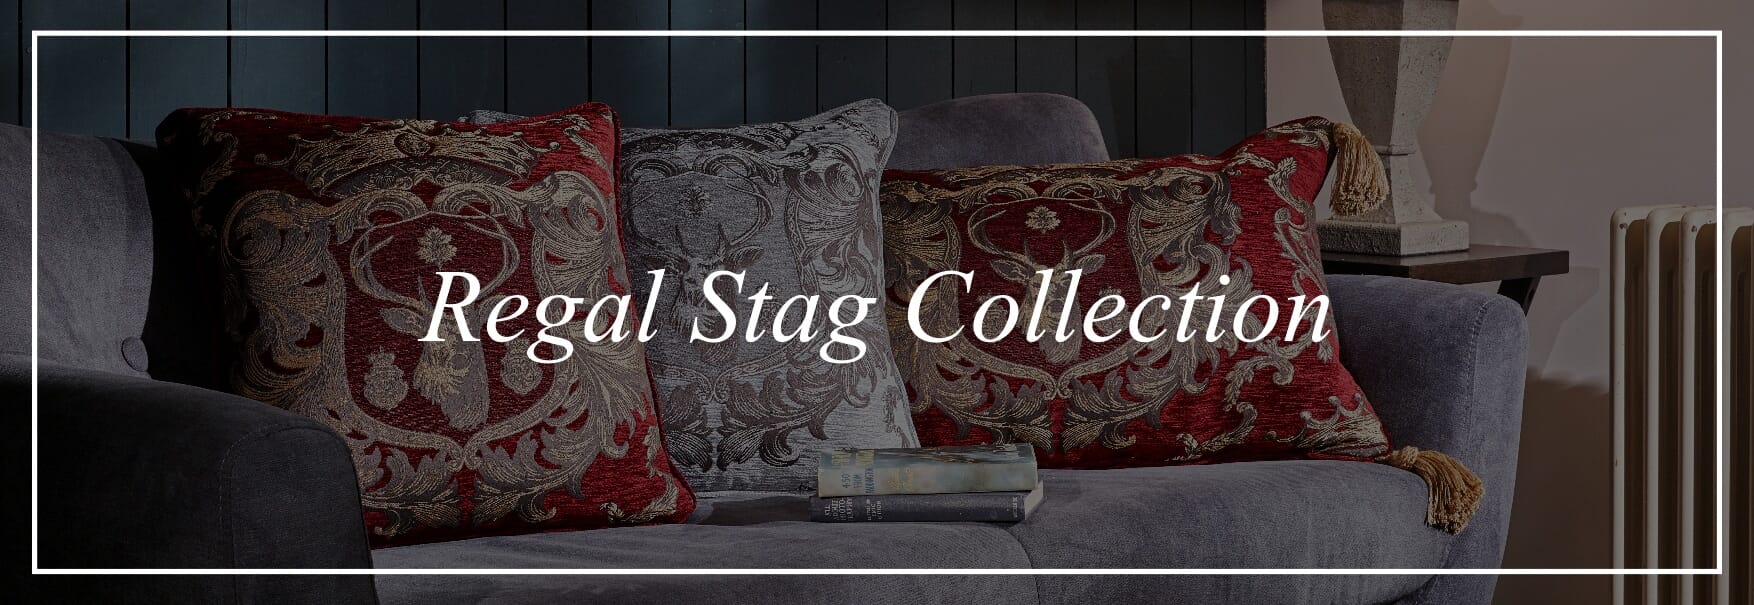 Regal Stag Collection